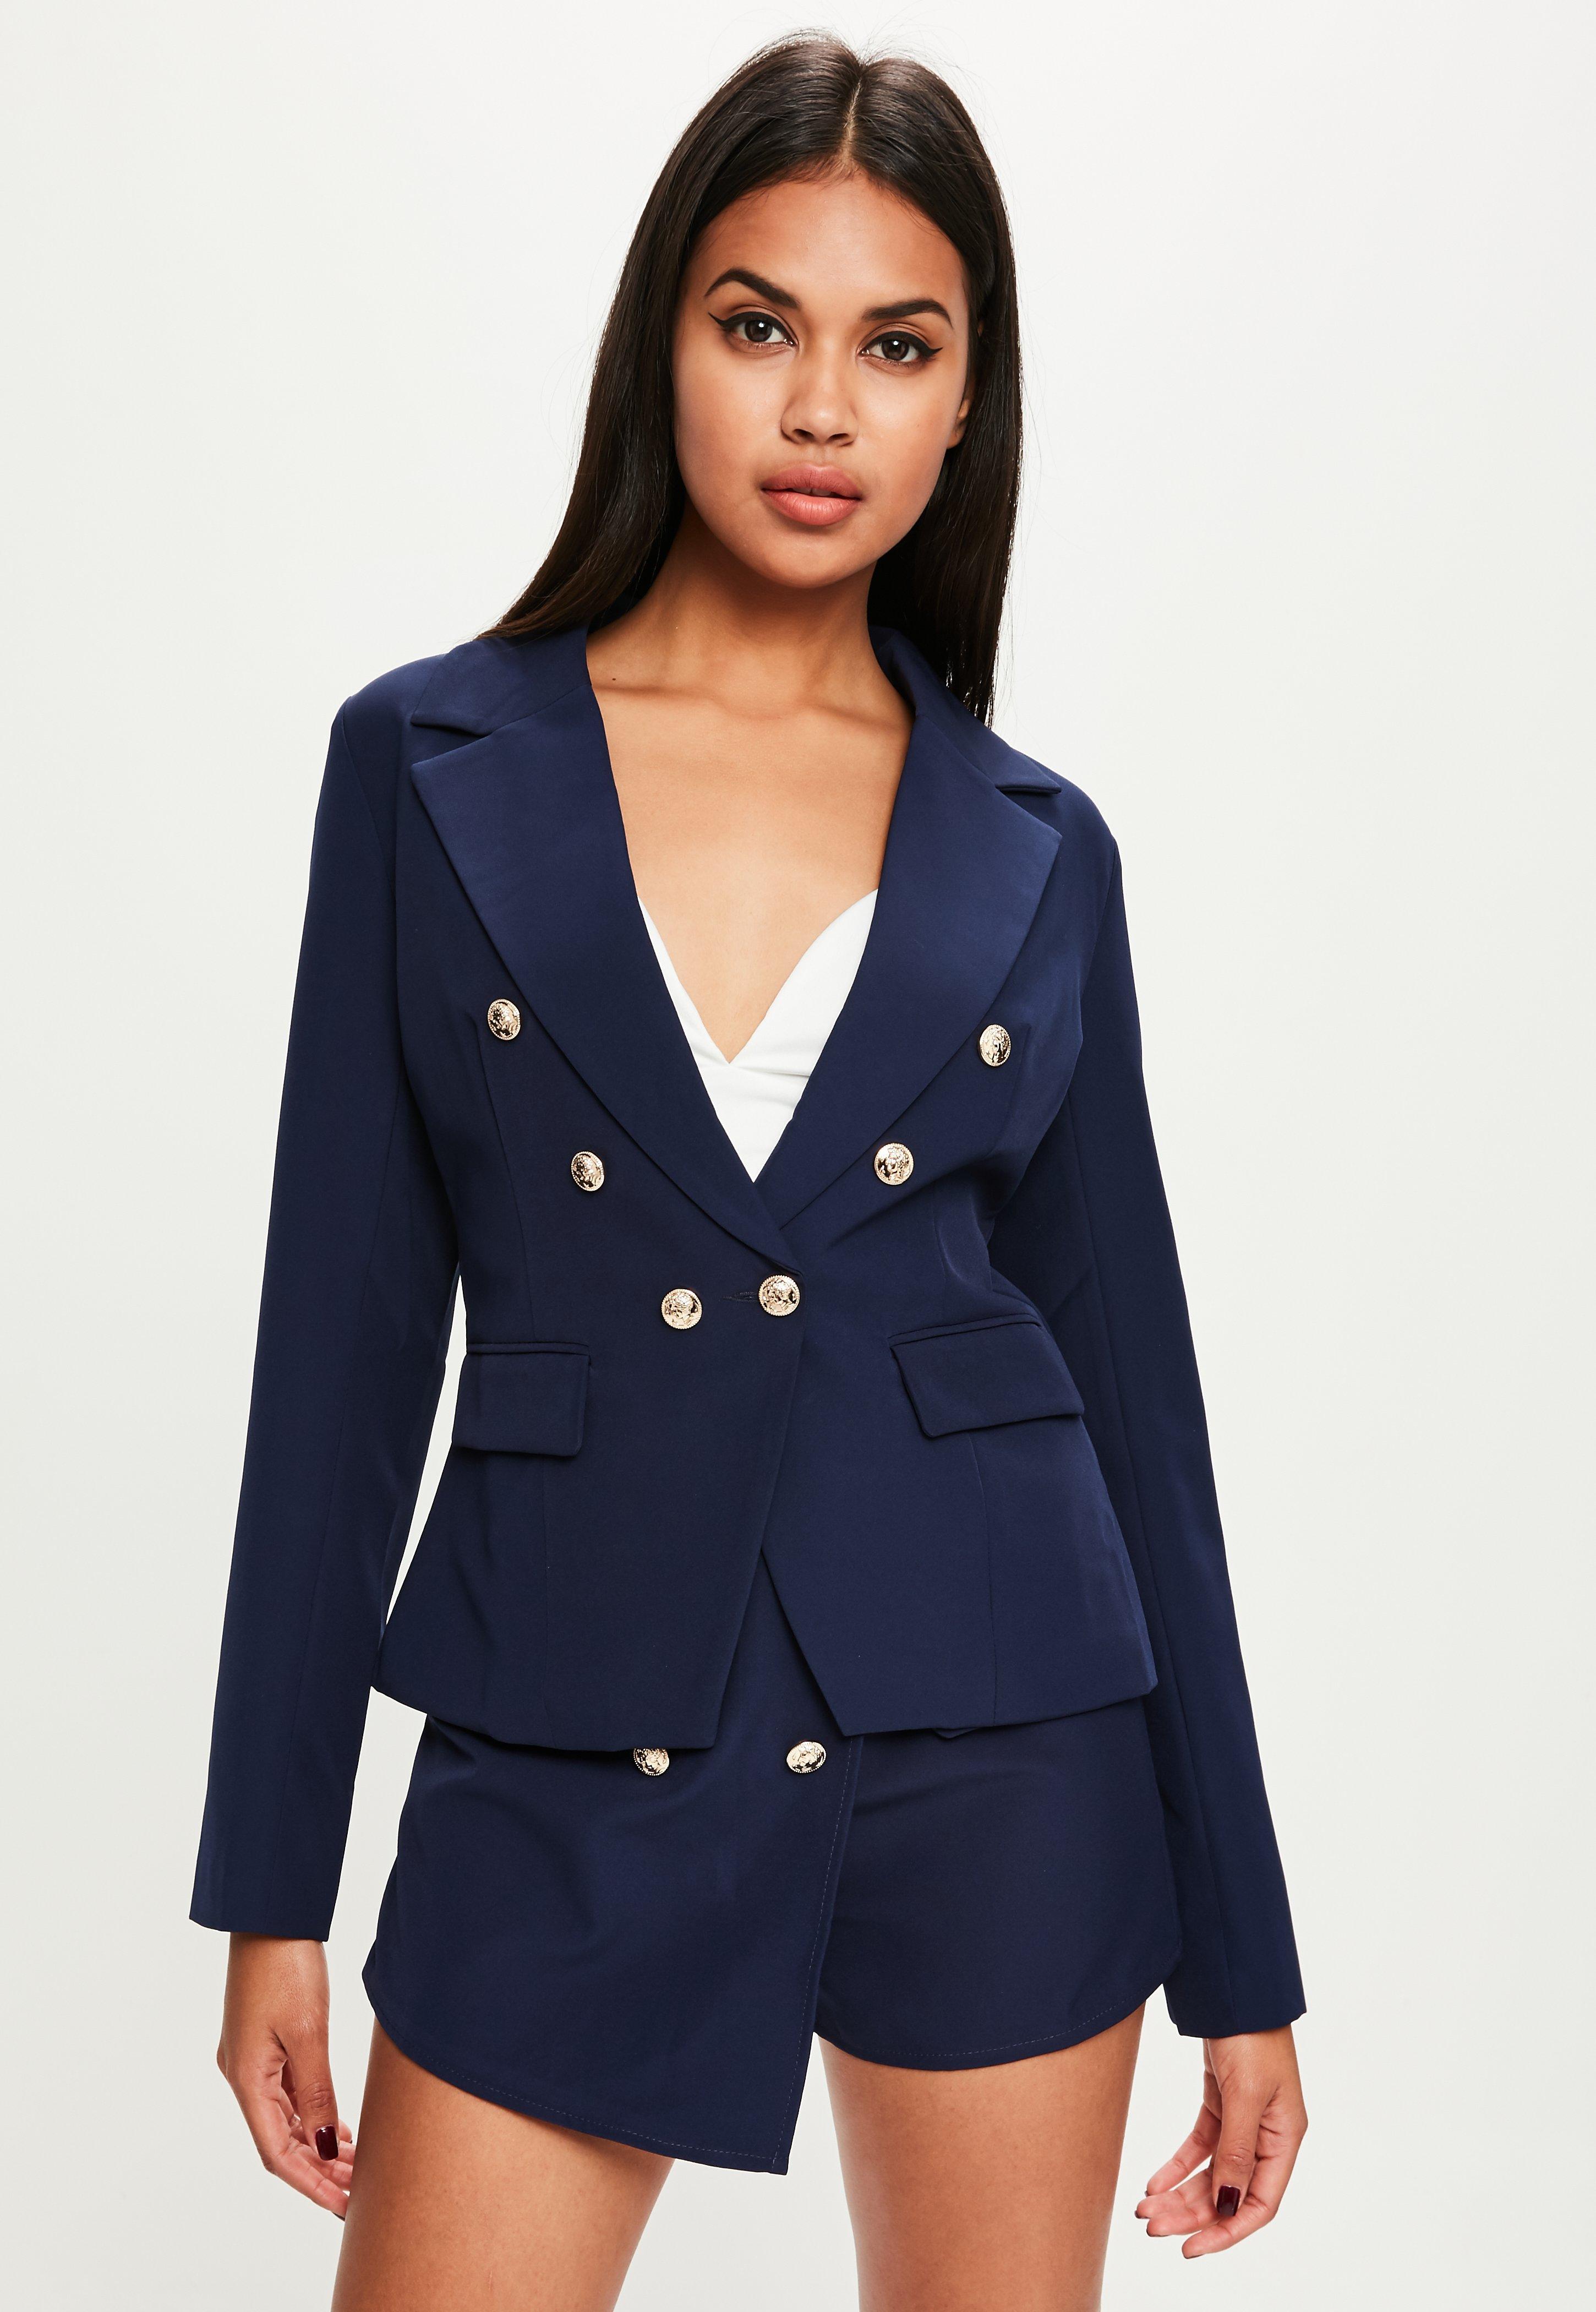 Lyst - Missguided Navy Military Jacket in Blue